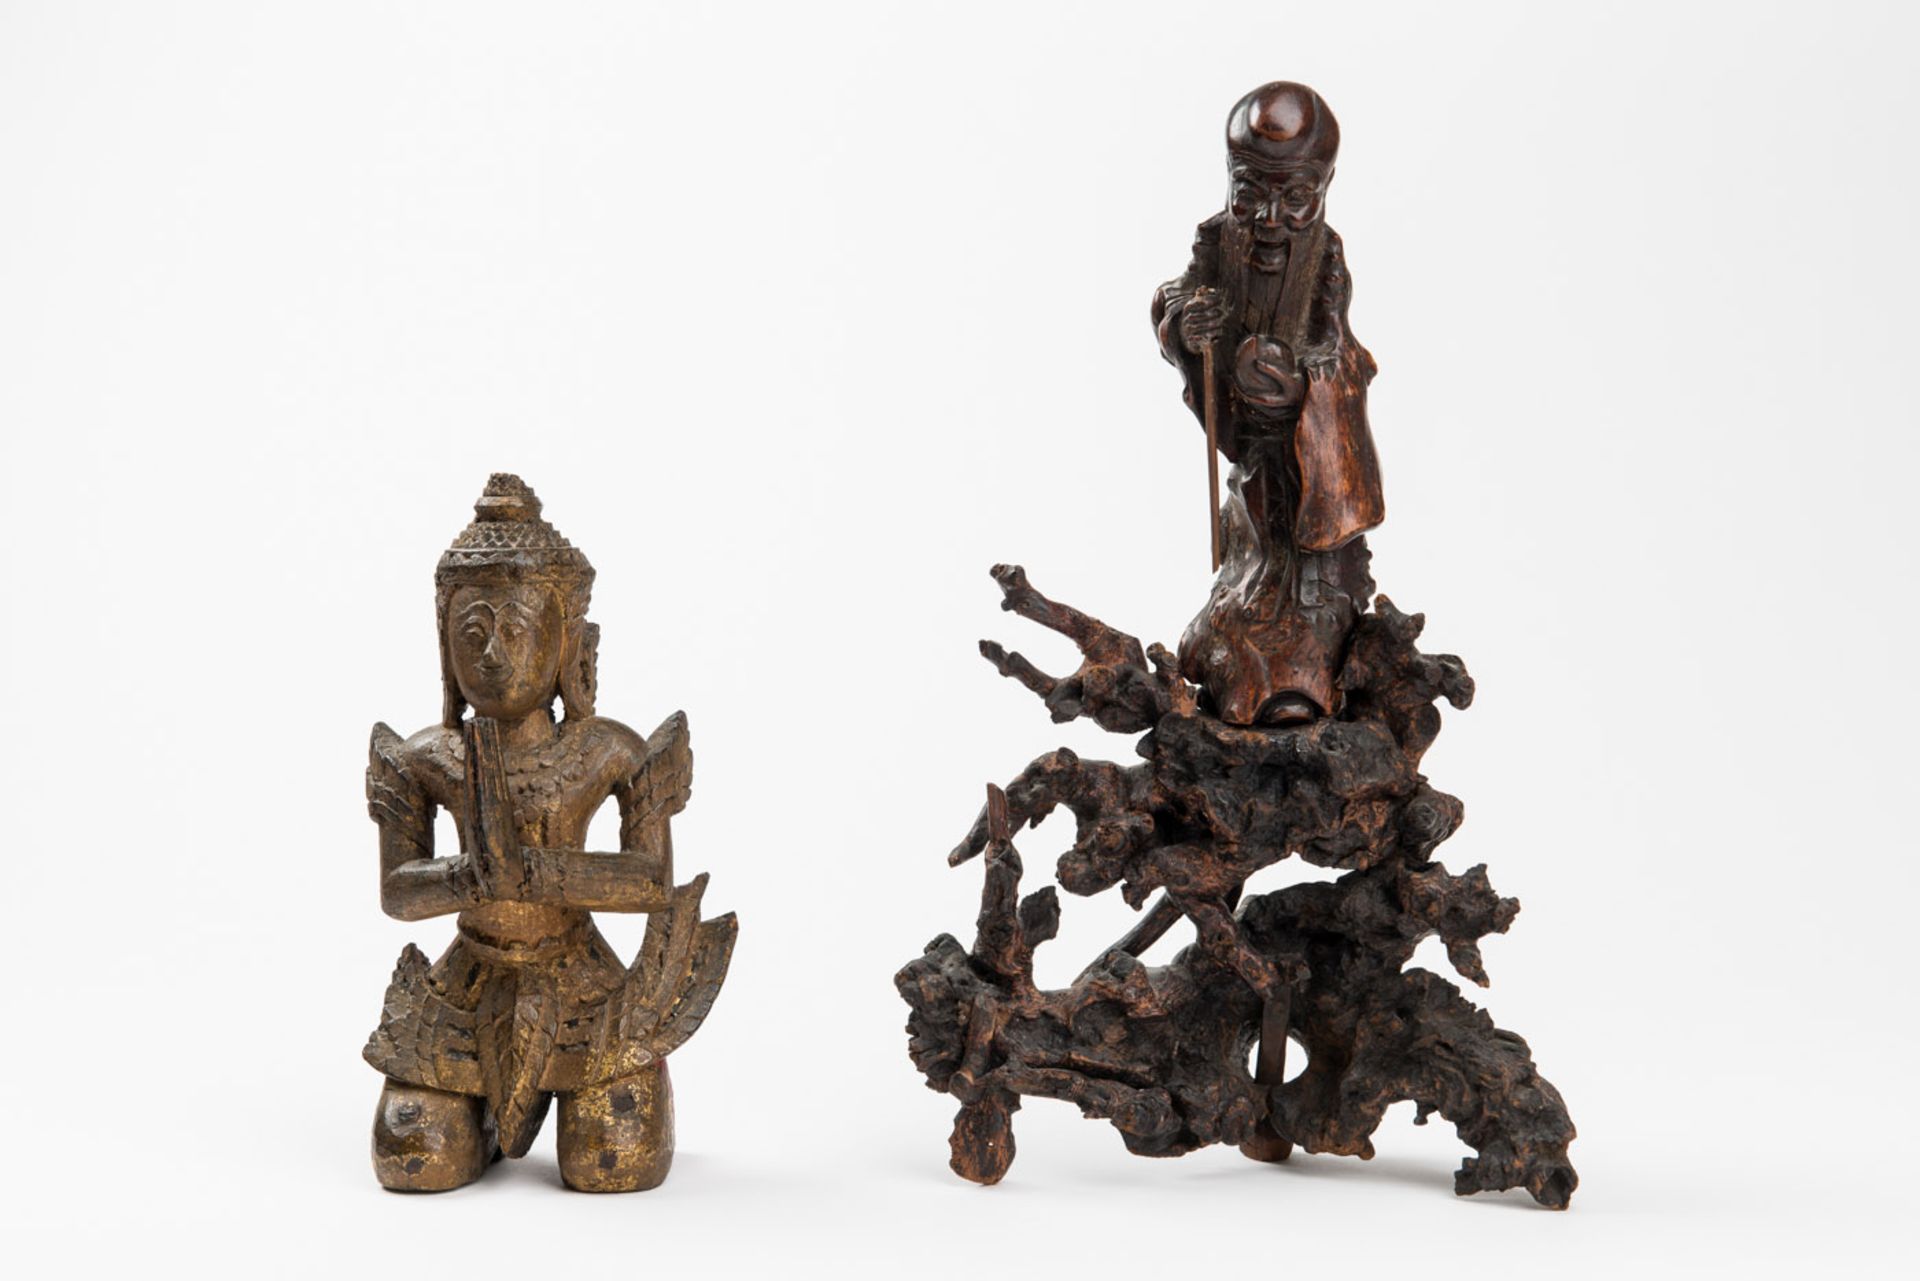 GROUP OF WOOD CARVED ADORANTS AND SHOULAO  Wood, some gilding, root wood, Thailand and China, 19th –